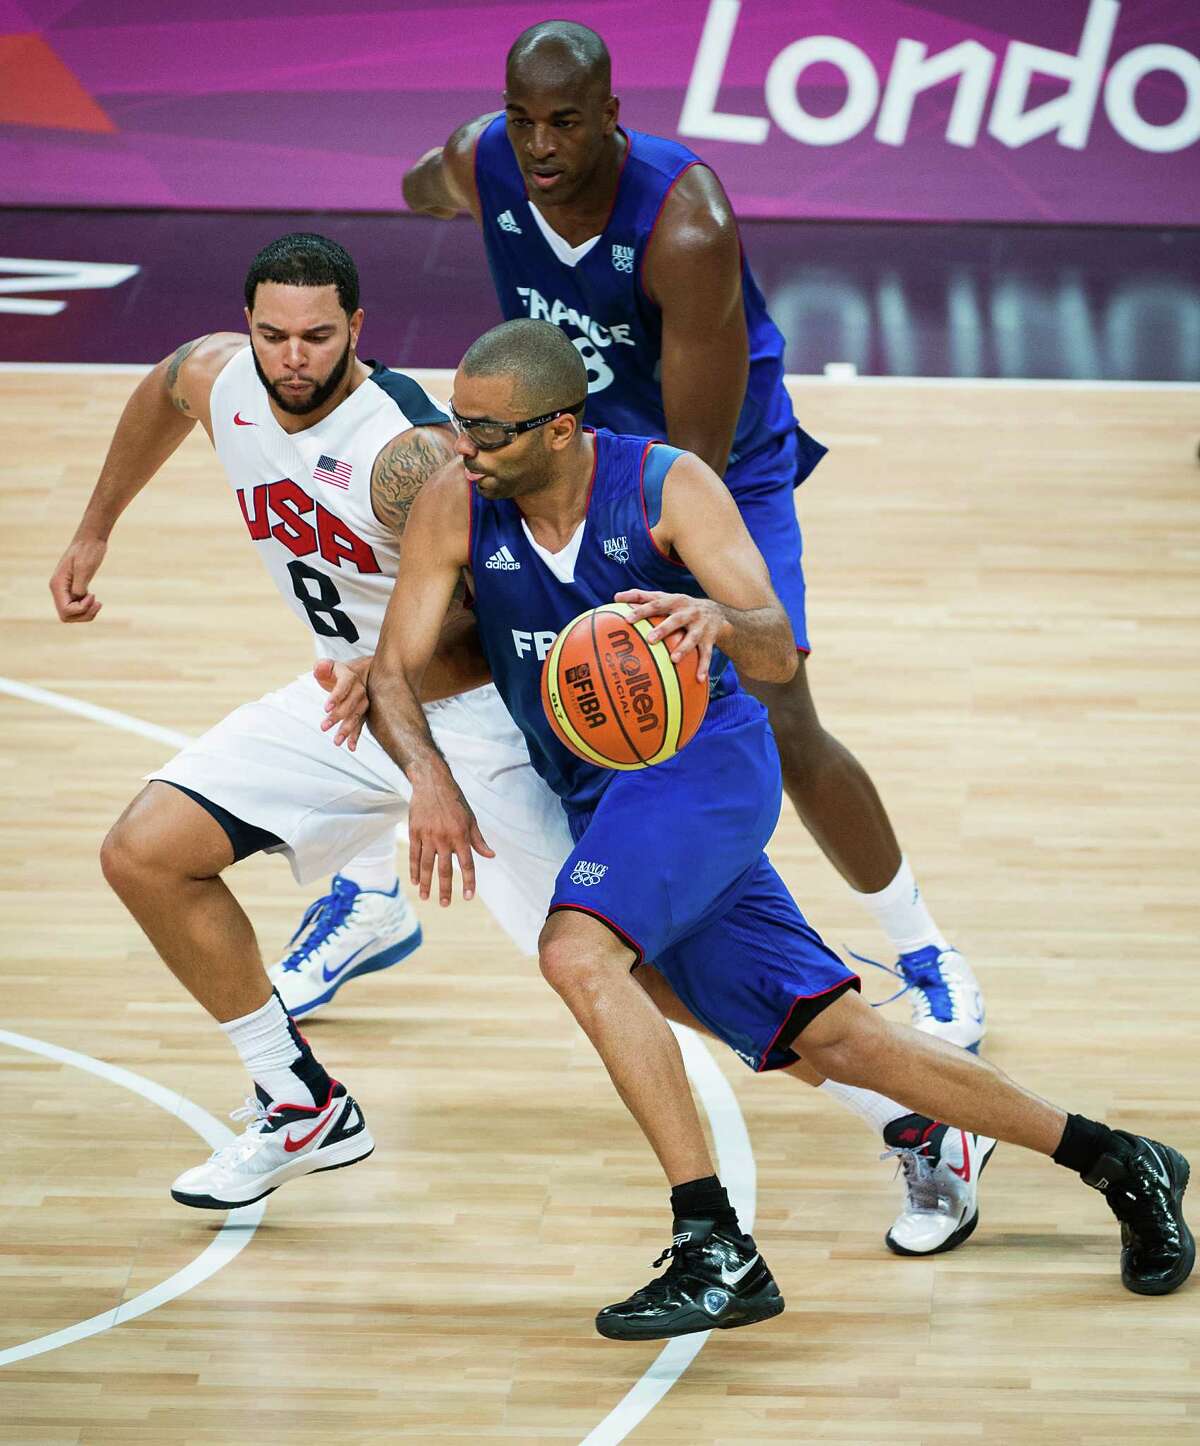 France's Tony Parker drives around USA's Deron Williams during men's preliminary round basketball at the 2012 London Olympics on Sunday, July 29, 2012.